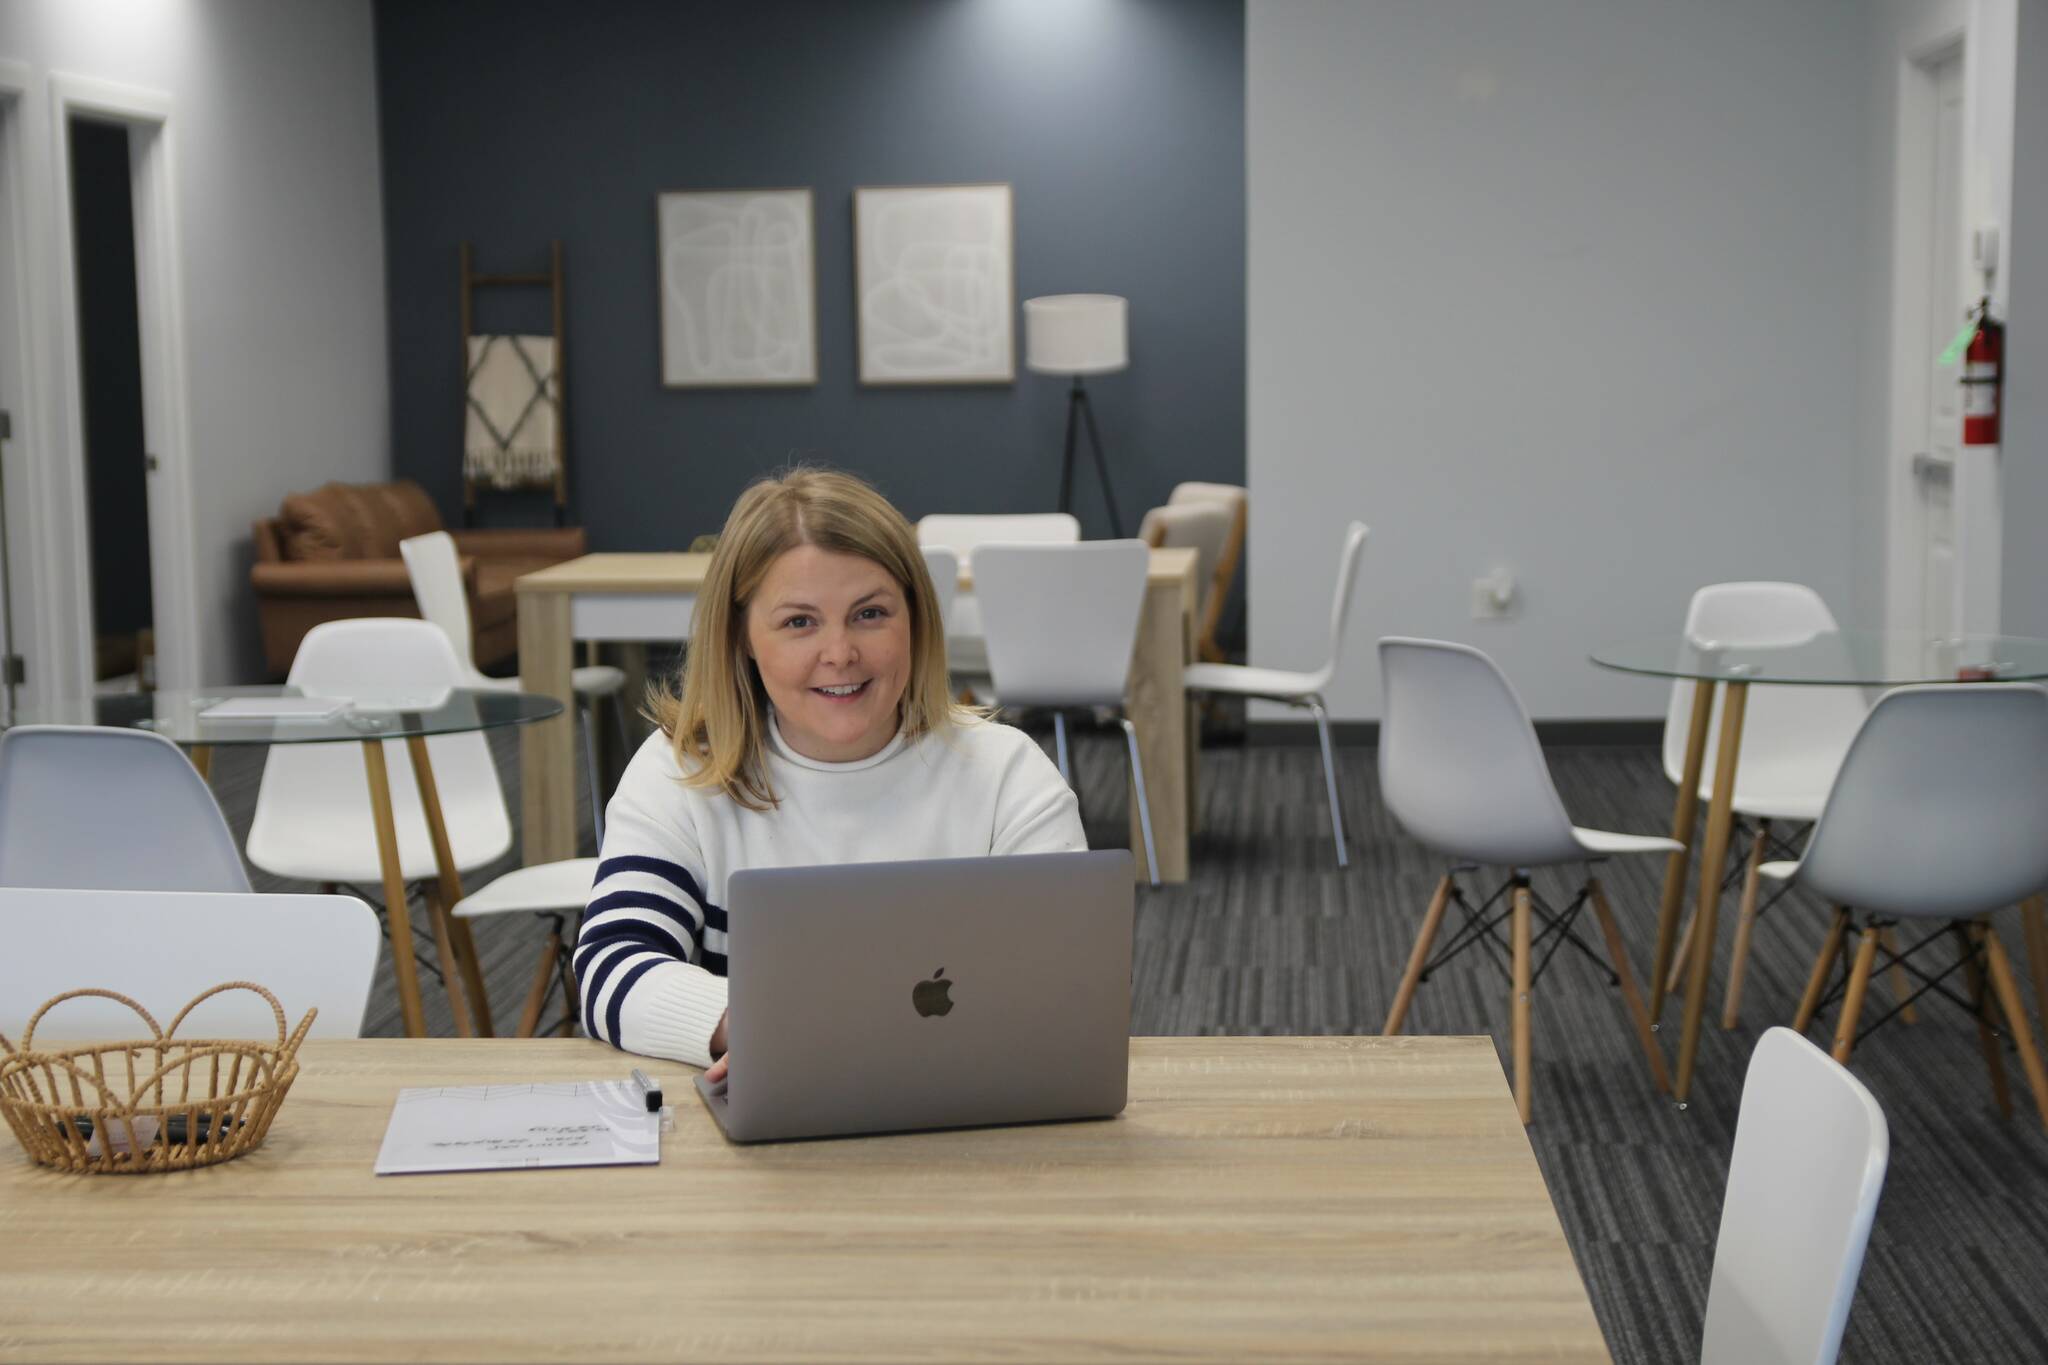 Dannah McCullough does some work at The Collective, a shared space where students and workers can work together and network. (Photo by Luisa Loi)